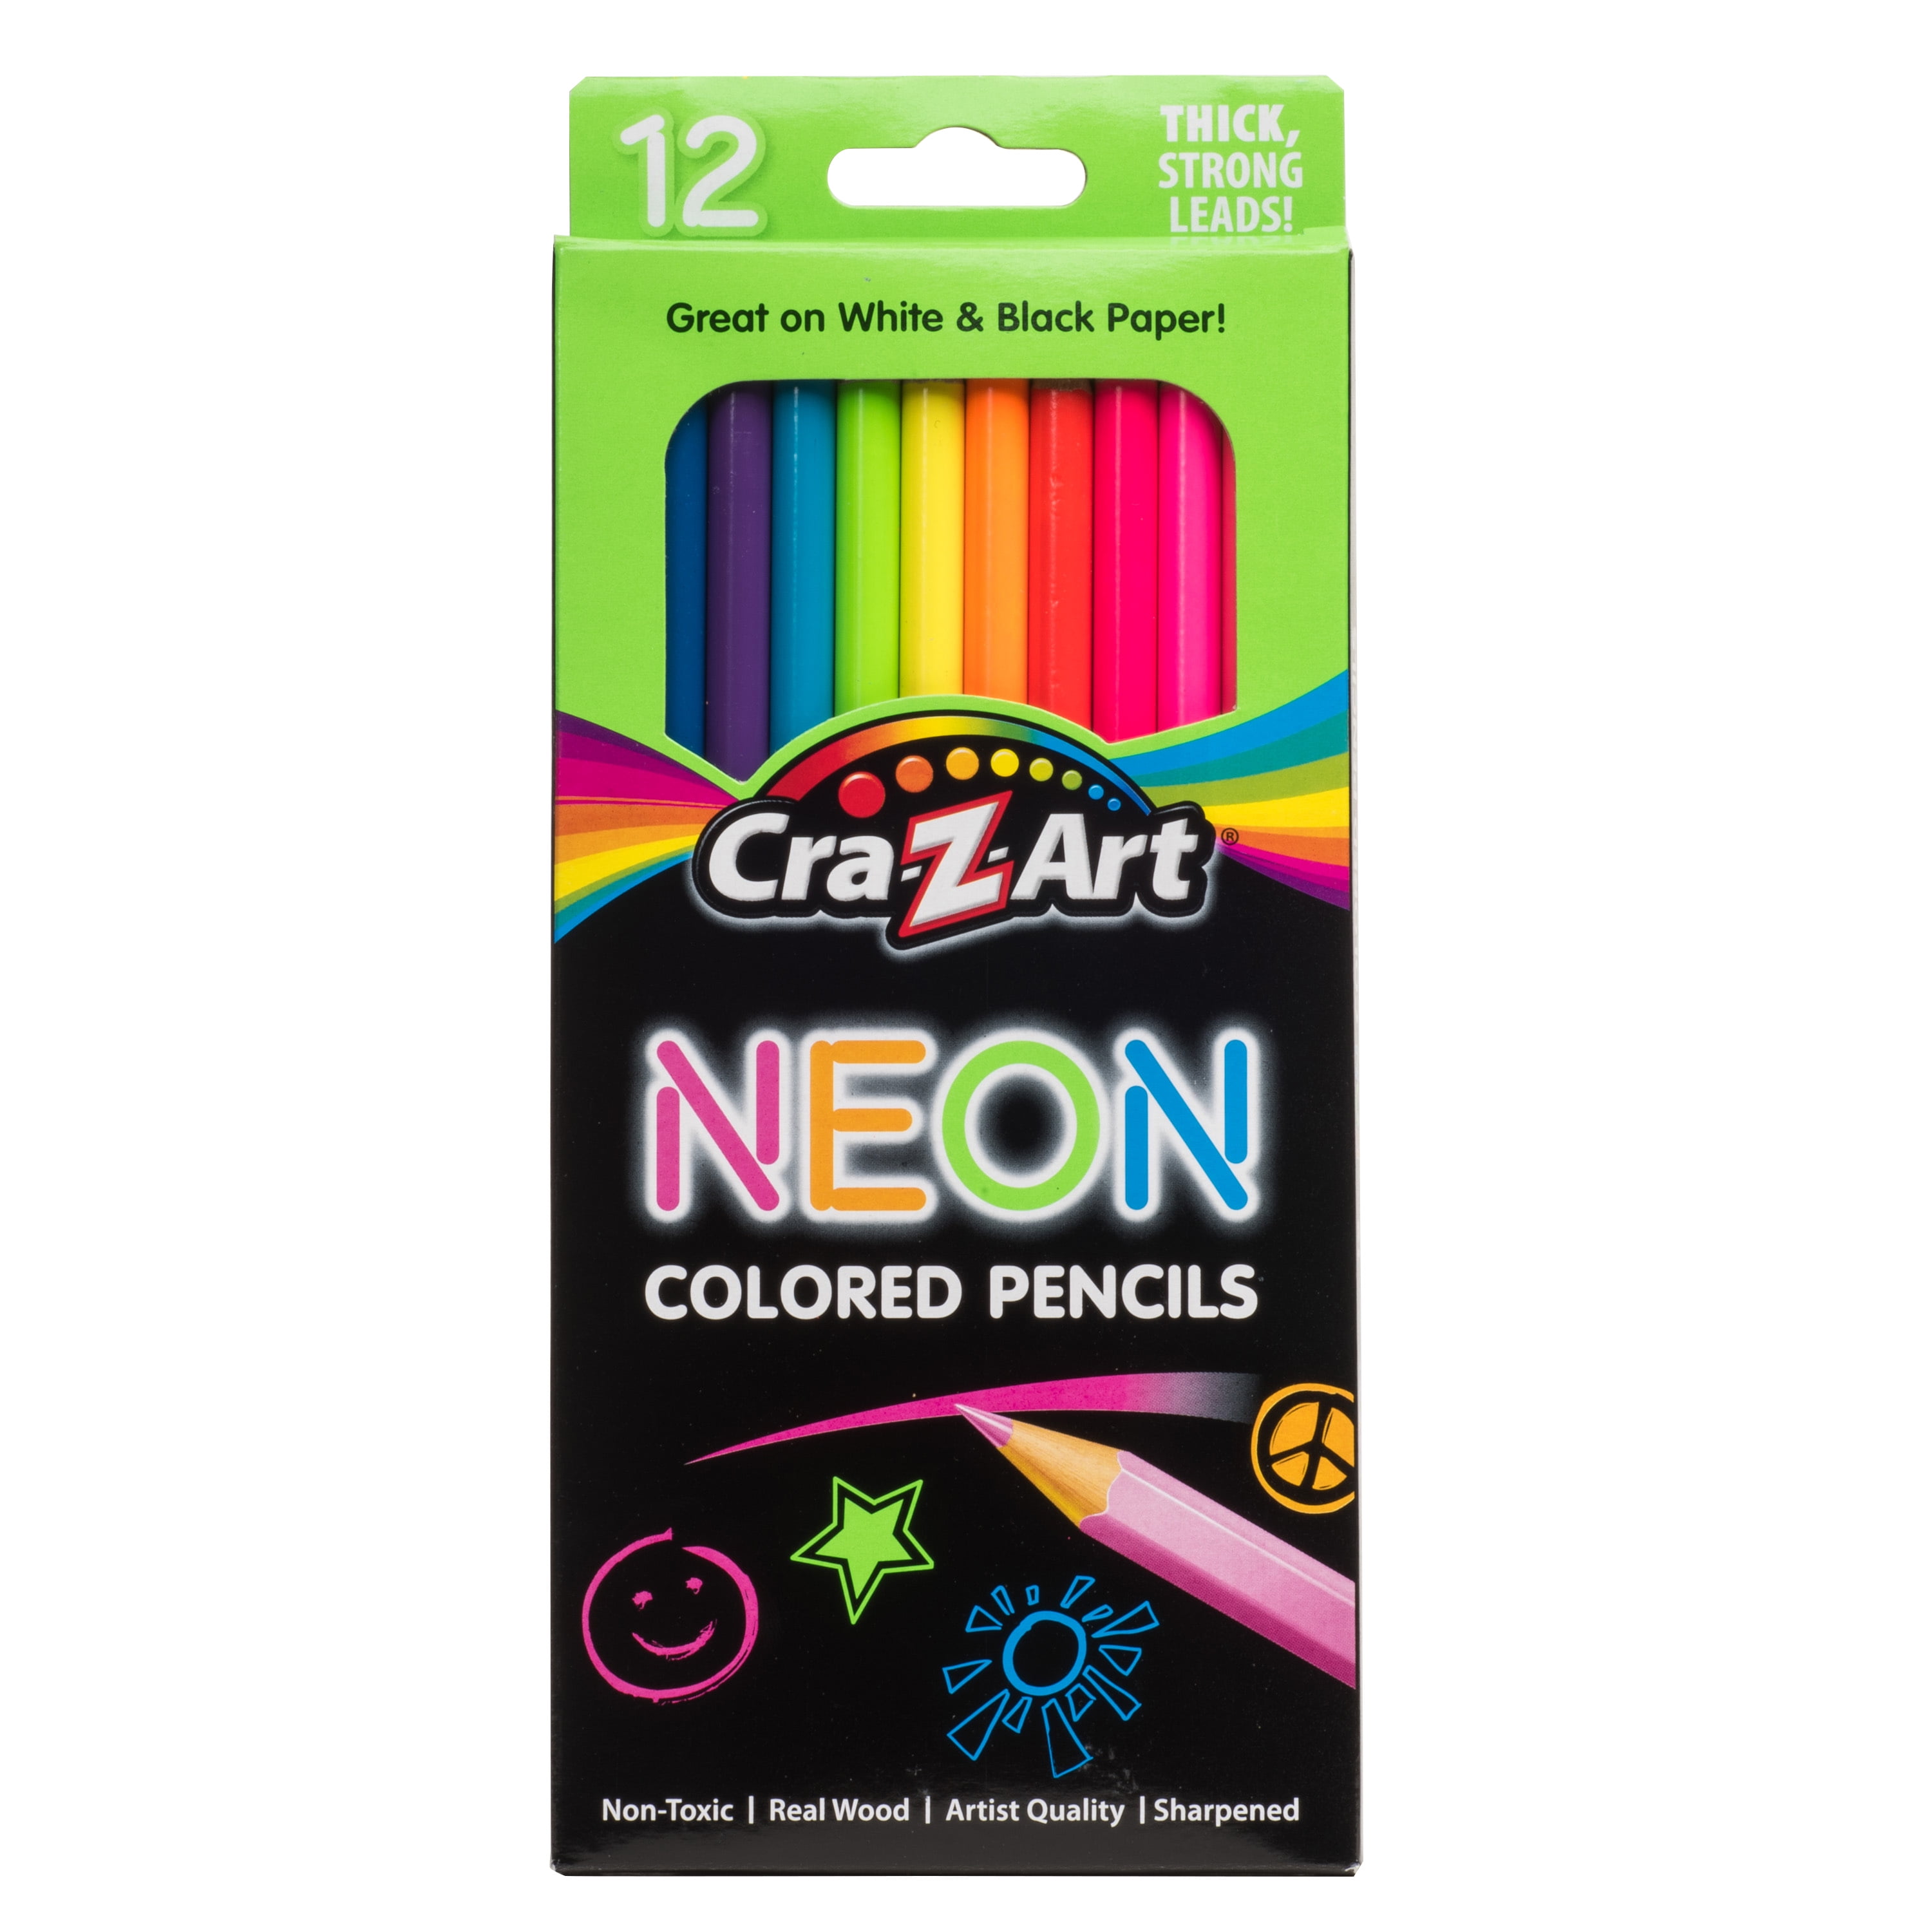 Cra-Z-art Colored Pencils 12 Count 2 pack 